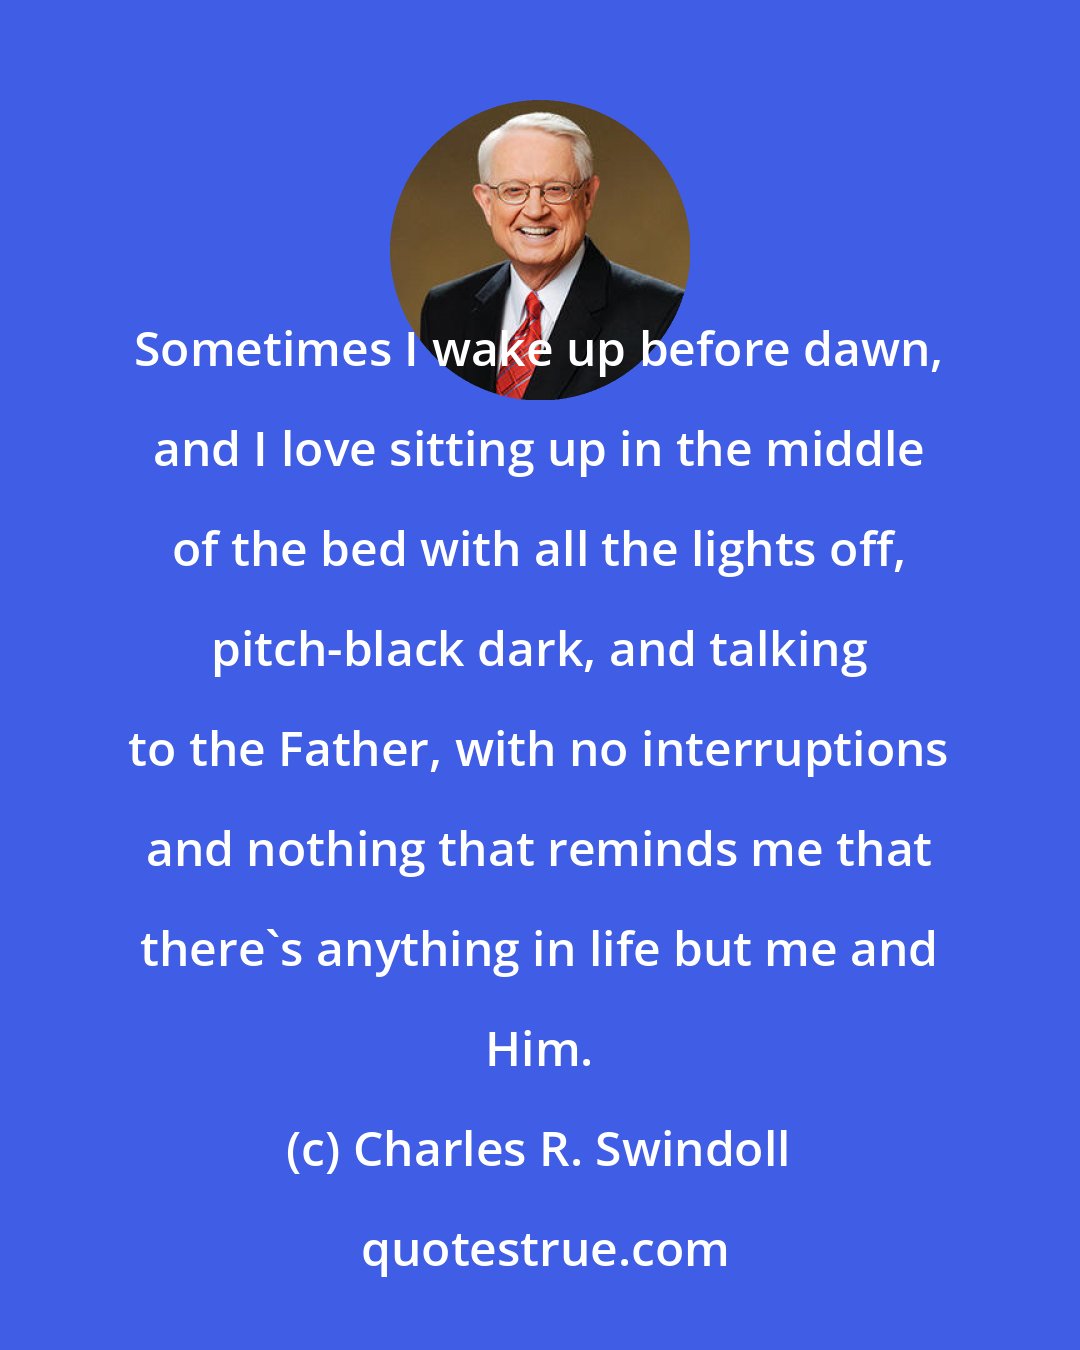 Charles R. Swindoll: Sometimes I wake up before dawn, and I love sitting up in the middle of the bed with all the lights off, pitch-black dark, and talking to the Father, with no interruptions and nothing that reminds me that there's anything in life but me and Him.